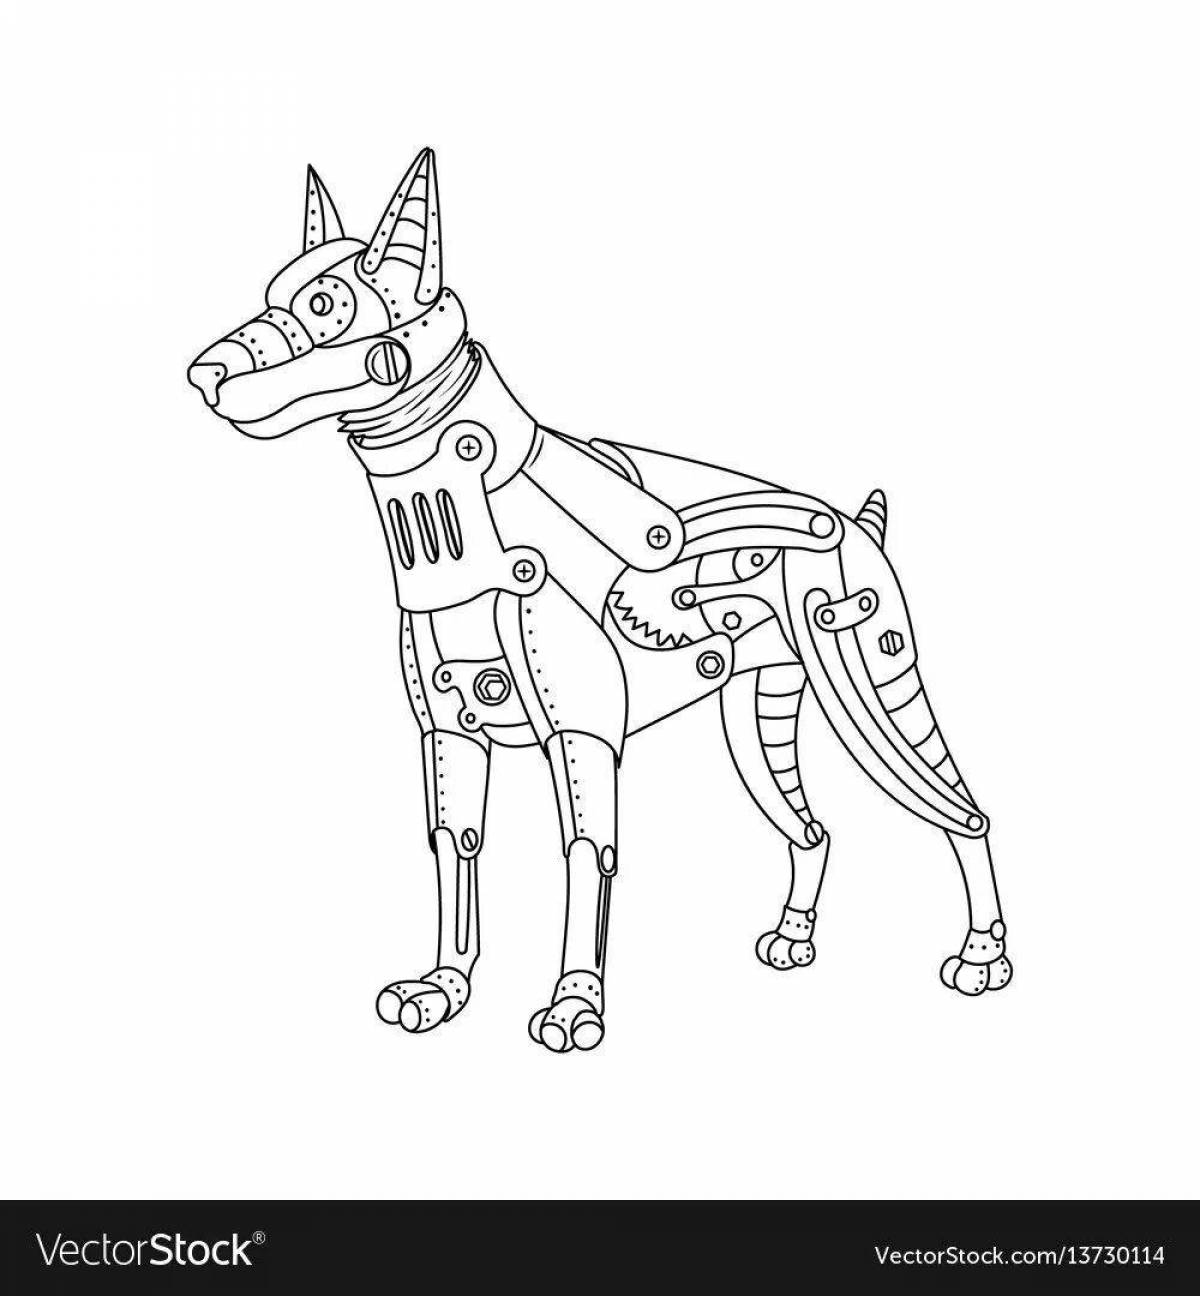 Glowing robot cat coloring page